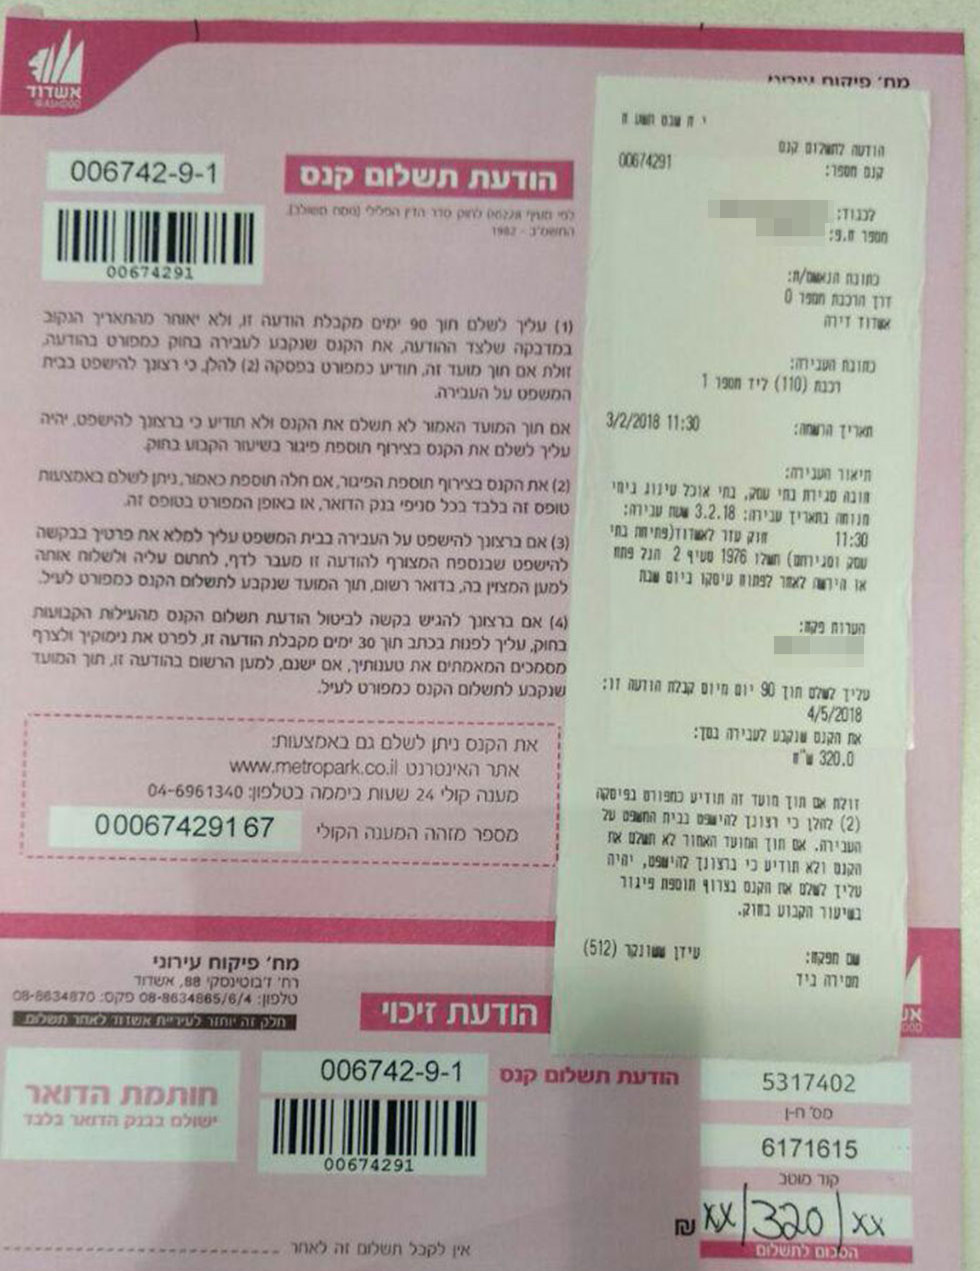 Fine given to one of the stores working on Shabbat